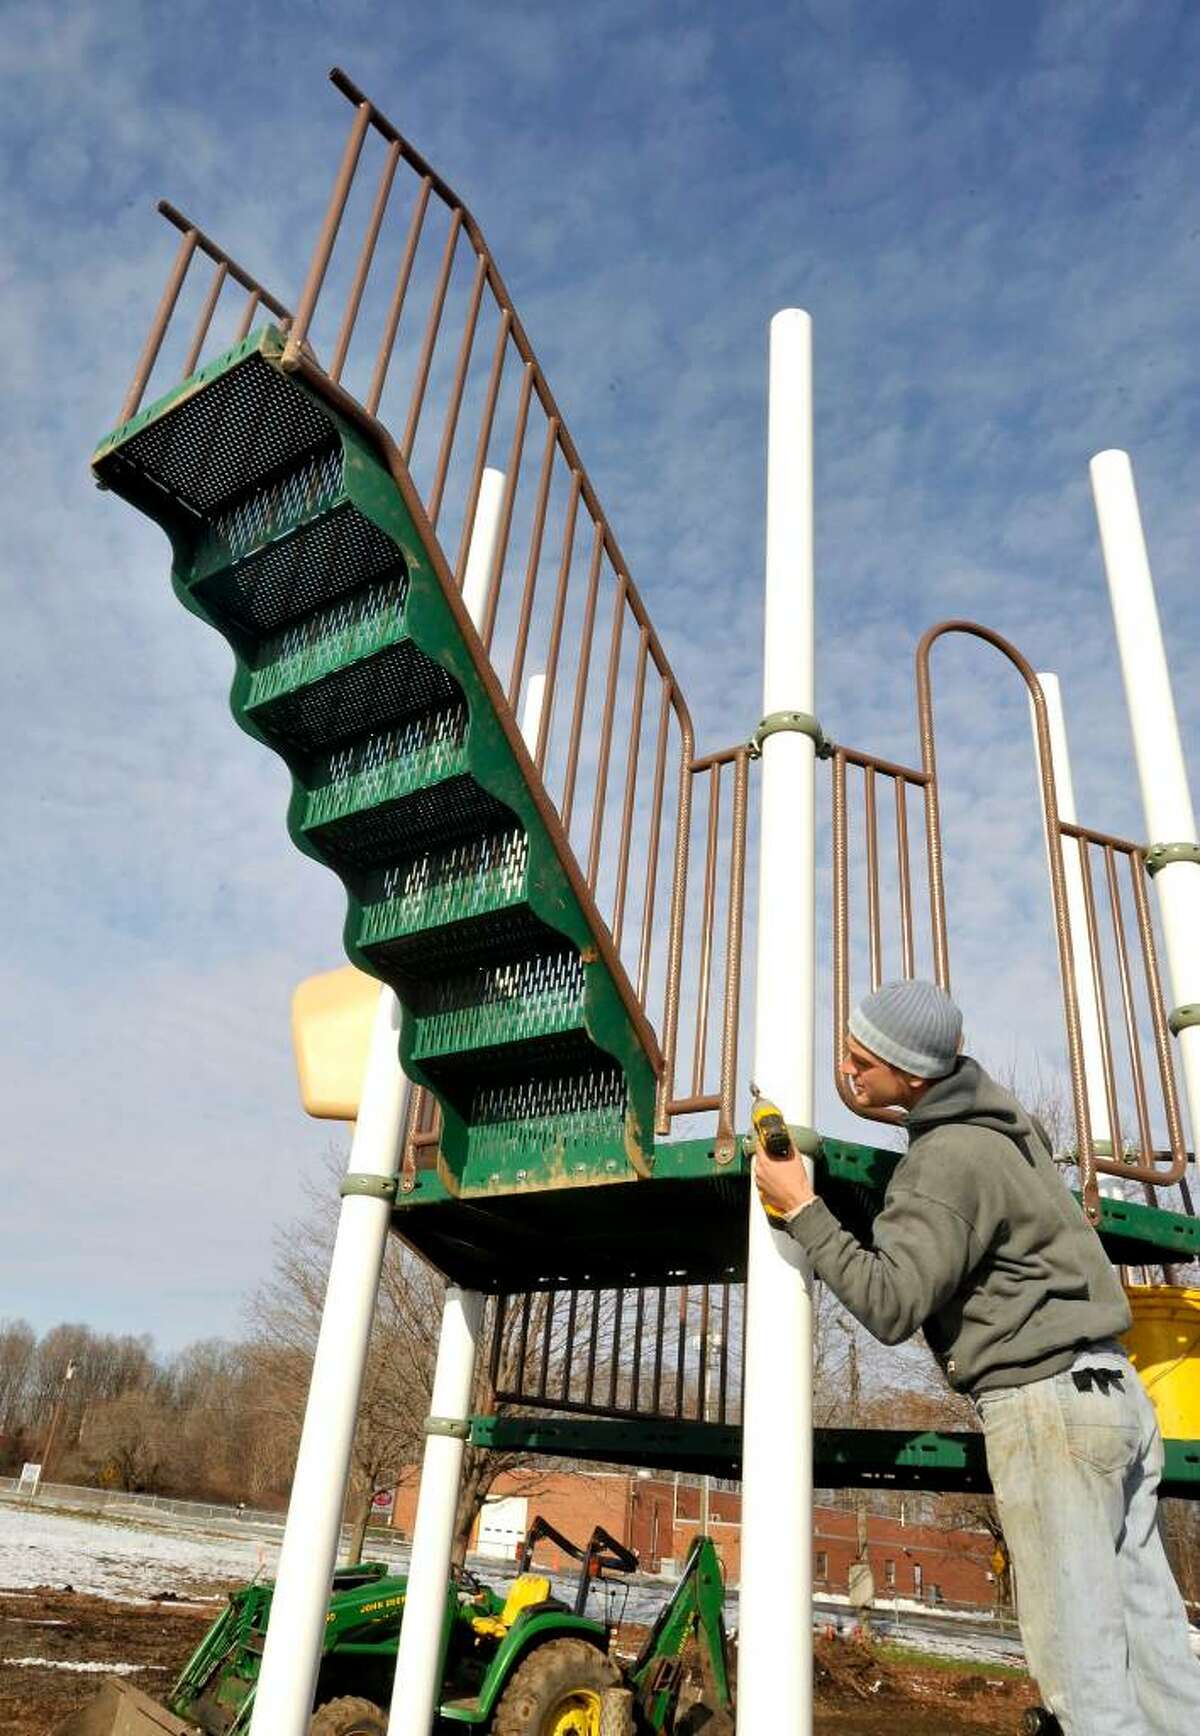 Anthony Sandagata, of Creative Recreation, works tighting components on the new Creative Playground system, in New Milford, on Monday, Dec.14,2009.